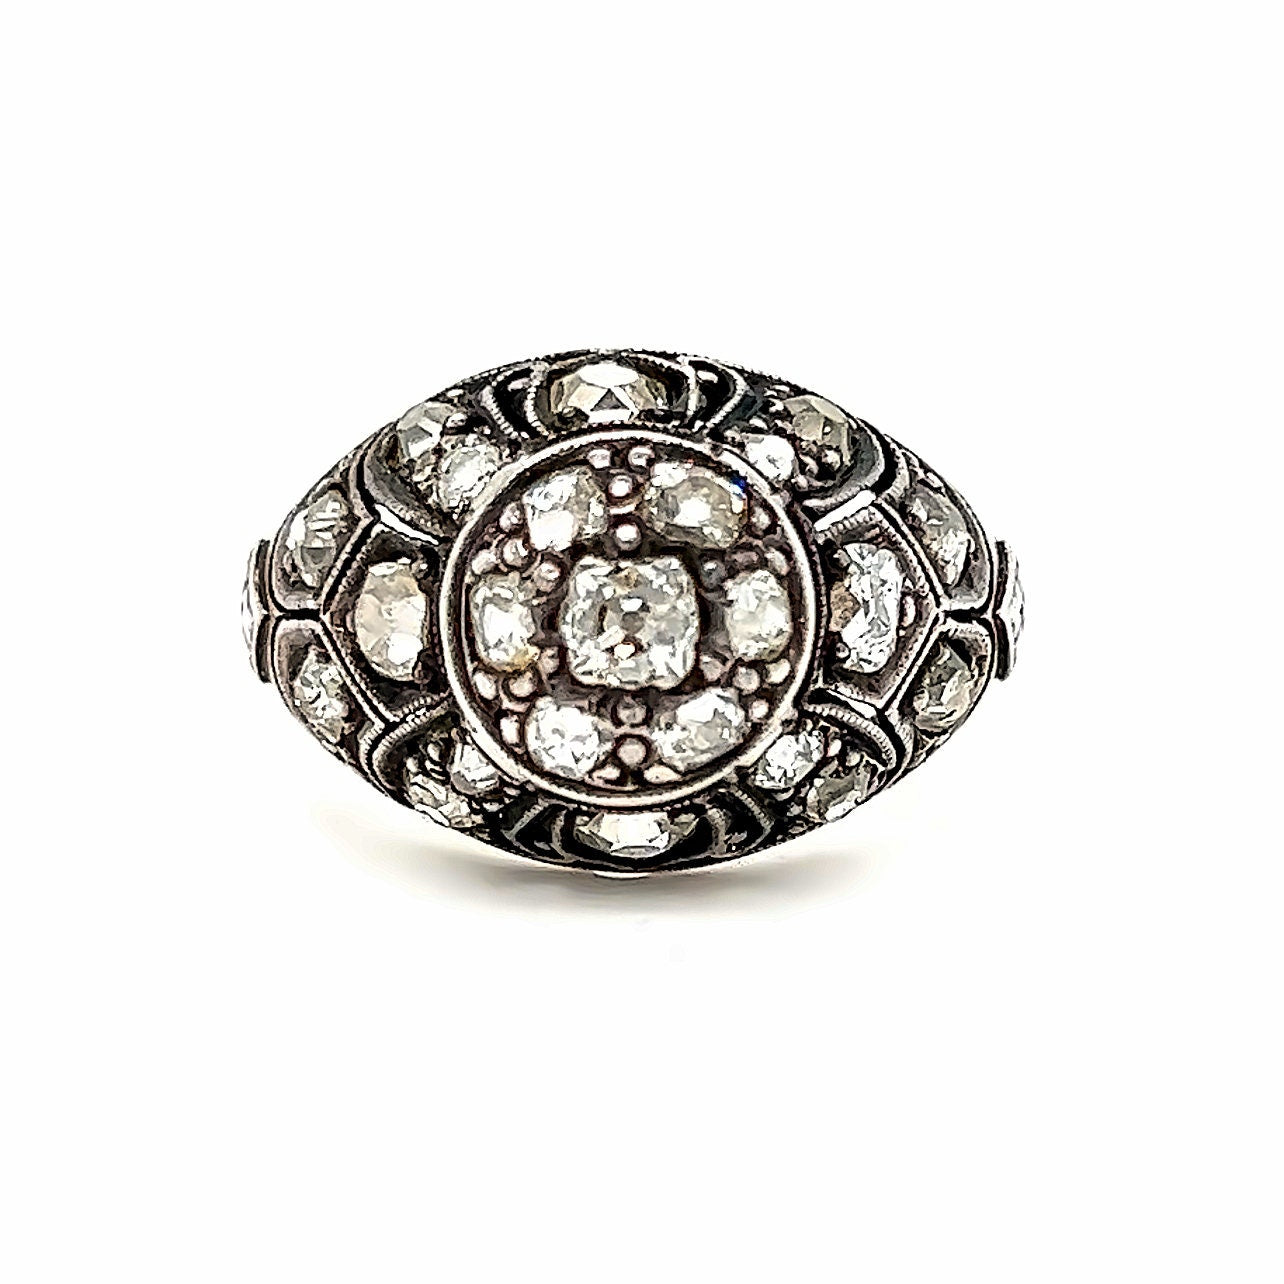 Antique Silver topped Gold Diamond Ring Engagement Ring.